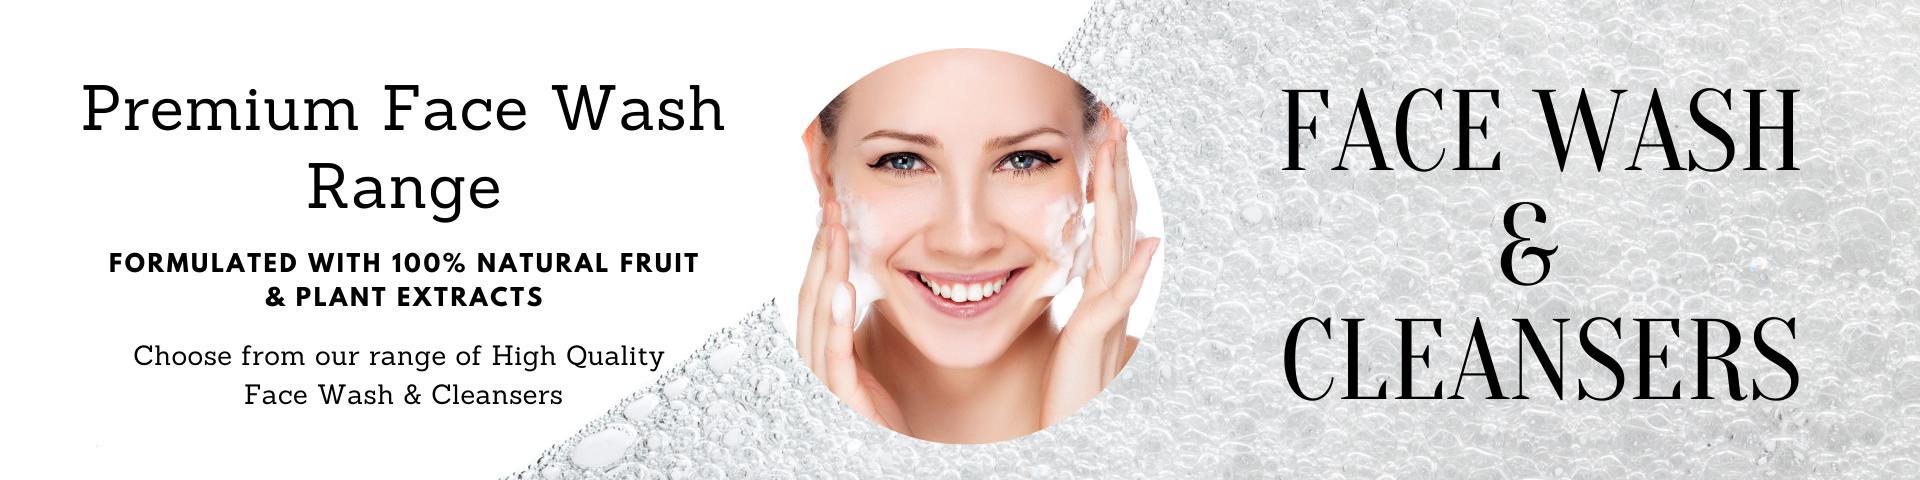 Face Wash And Cleanser Products Banner